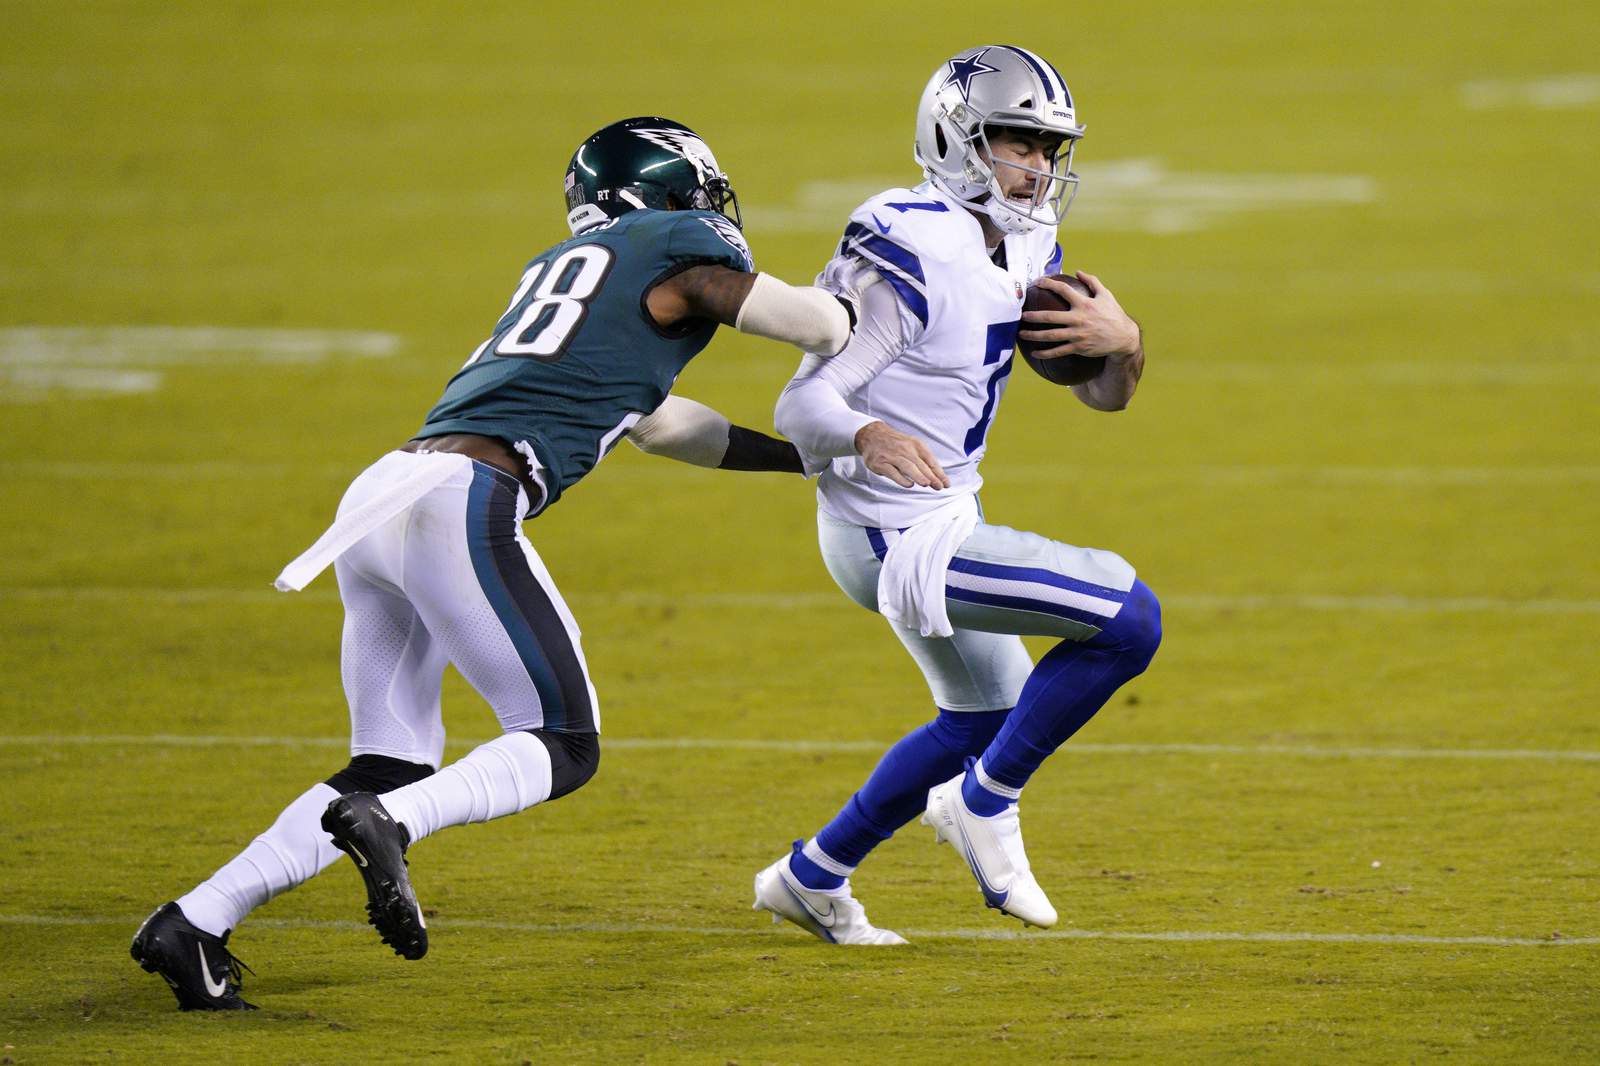 Cowboys will have 4th starting QB of season against Steelers